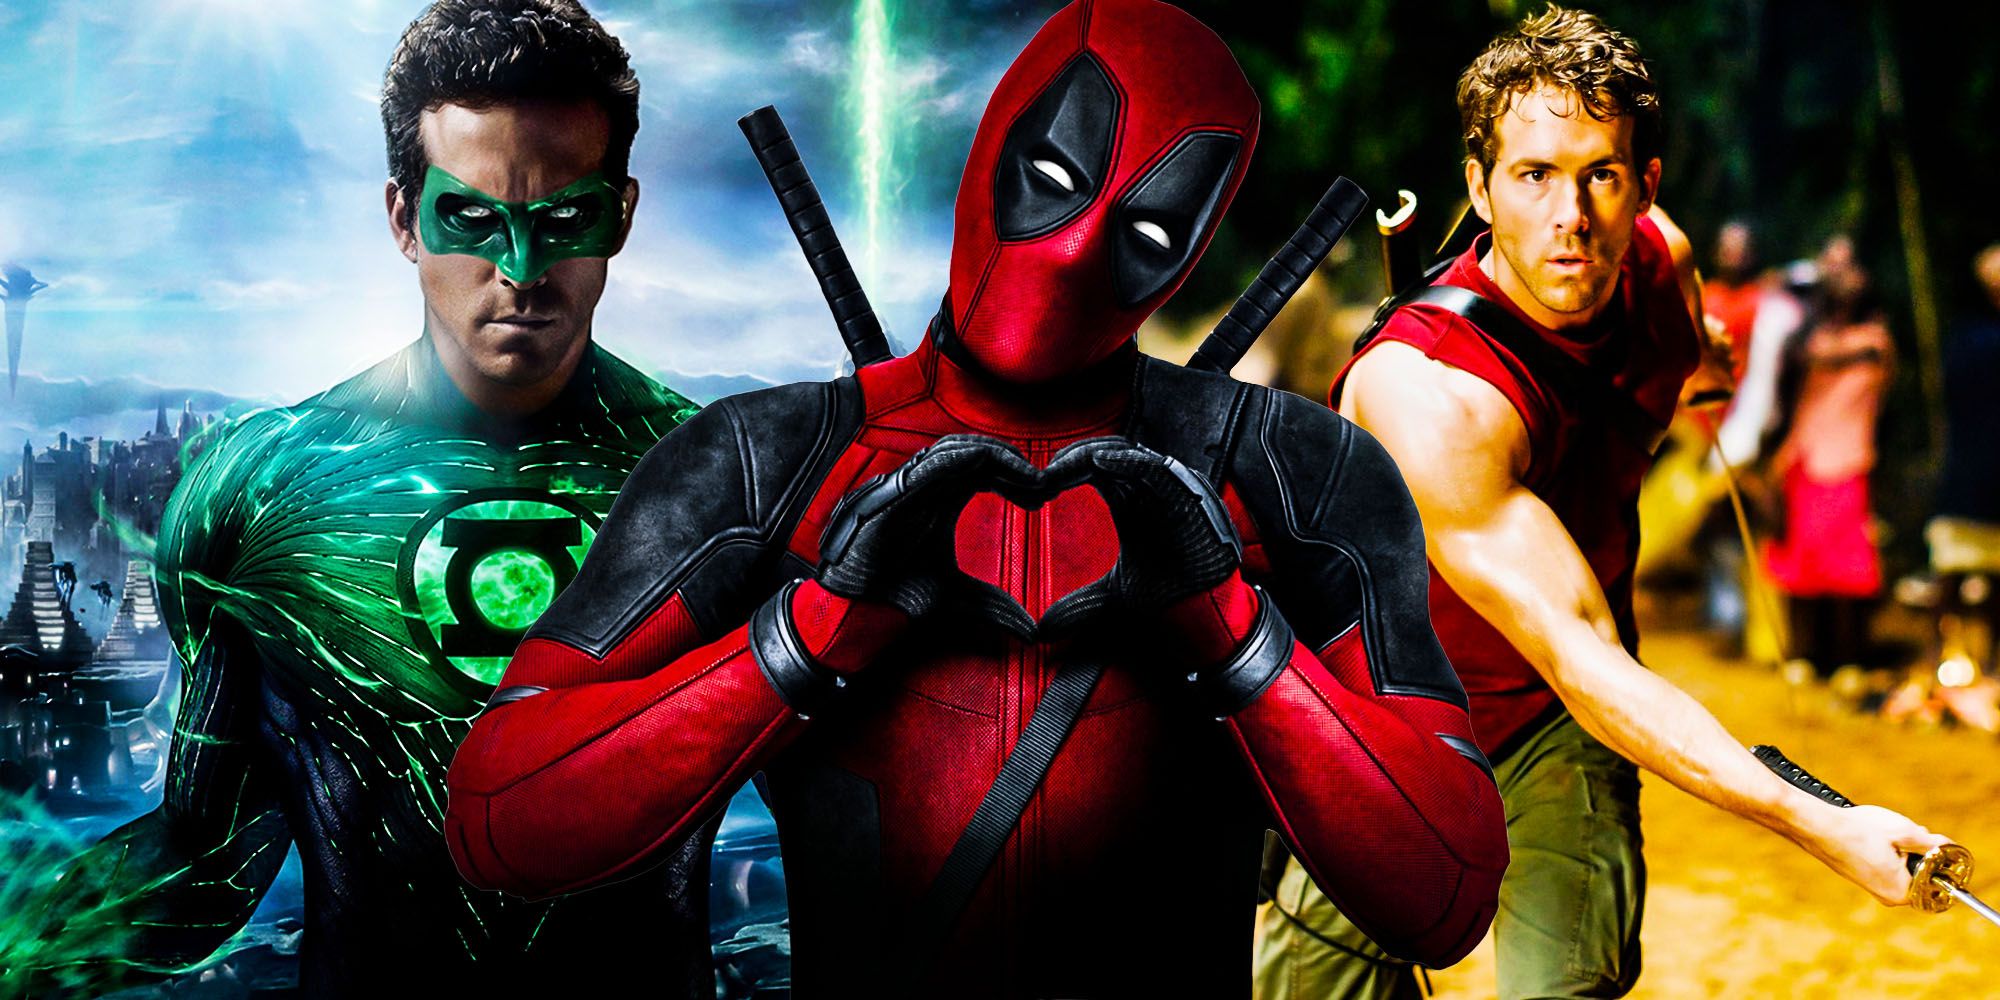 Why Ryan Reynolds Makes Better Action Movies Than Comedies